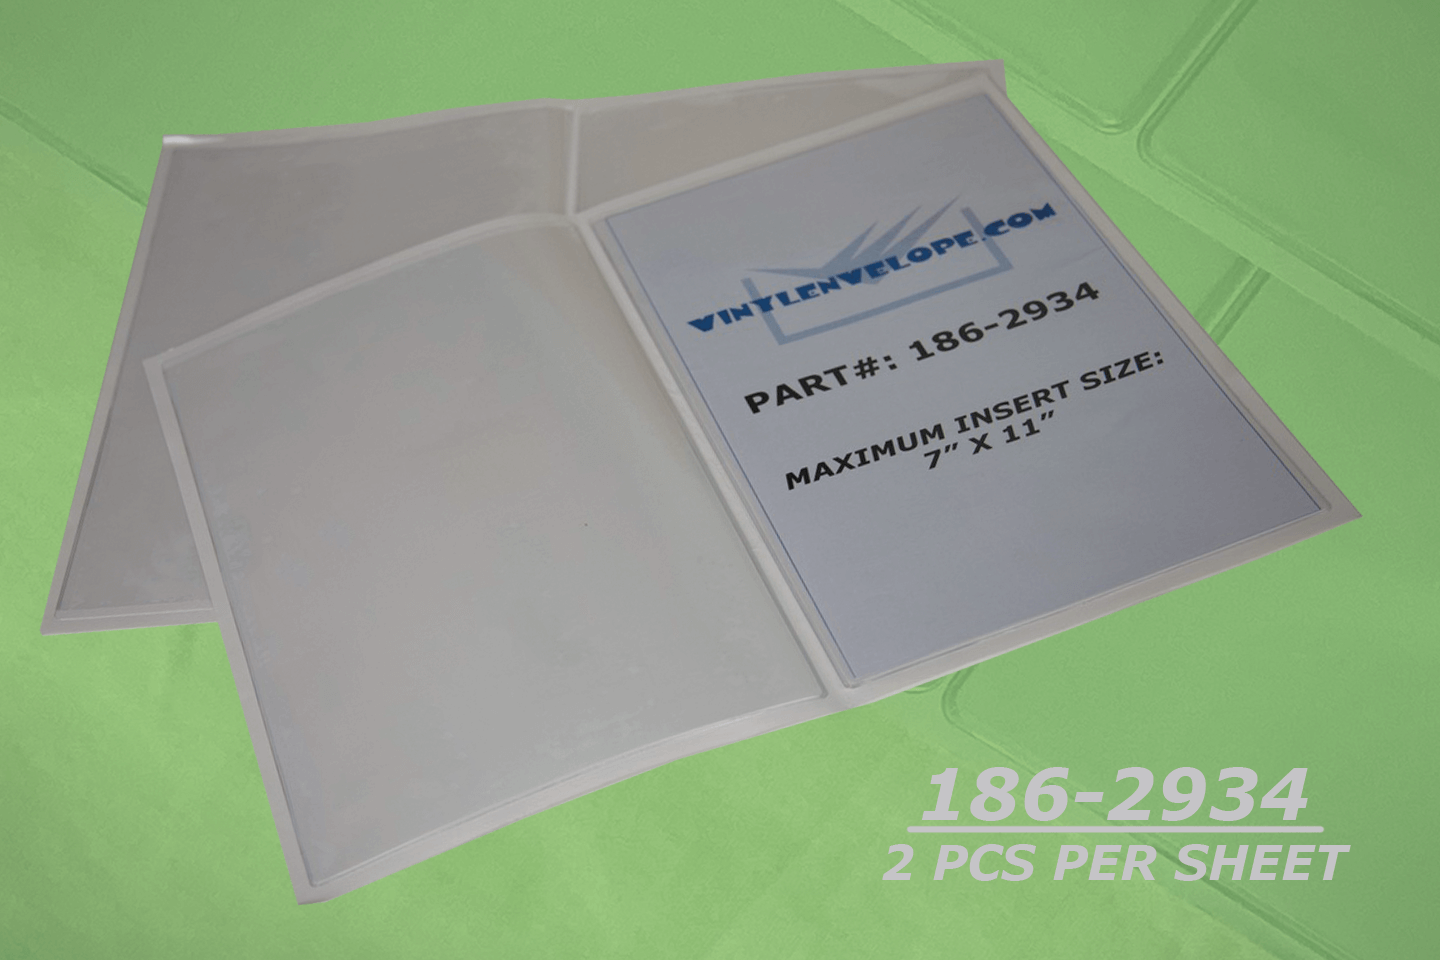 7 3/8" x 11 3/8" Adhesive pouch